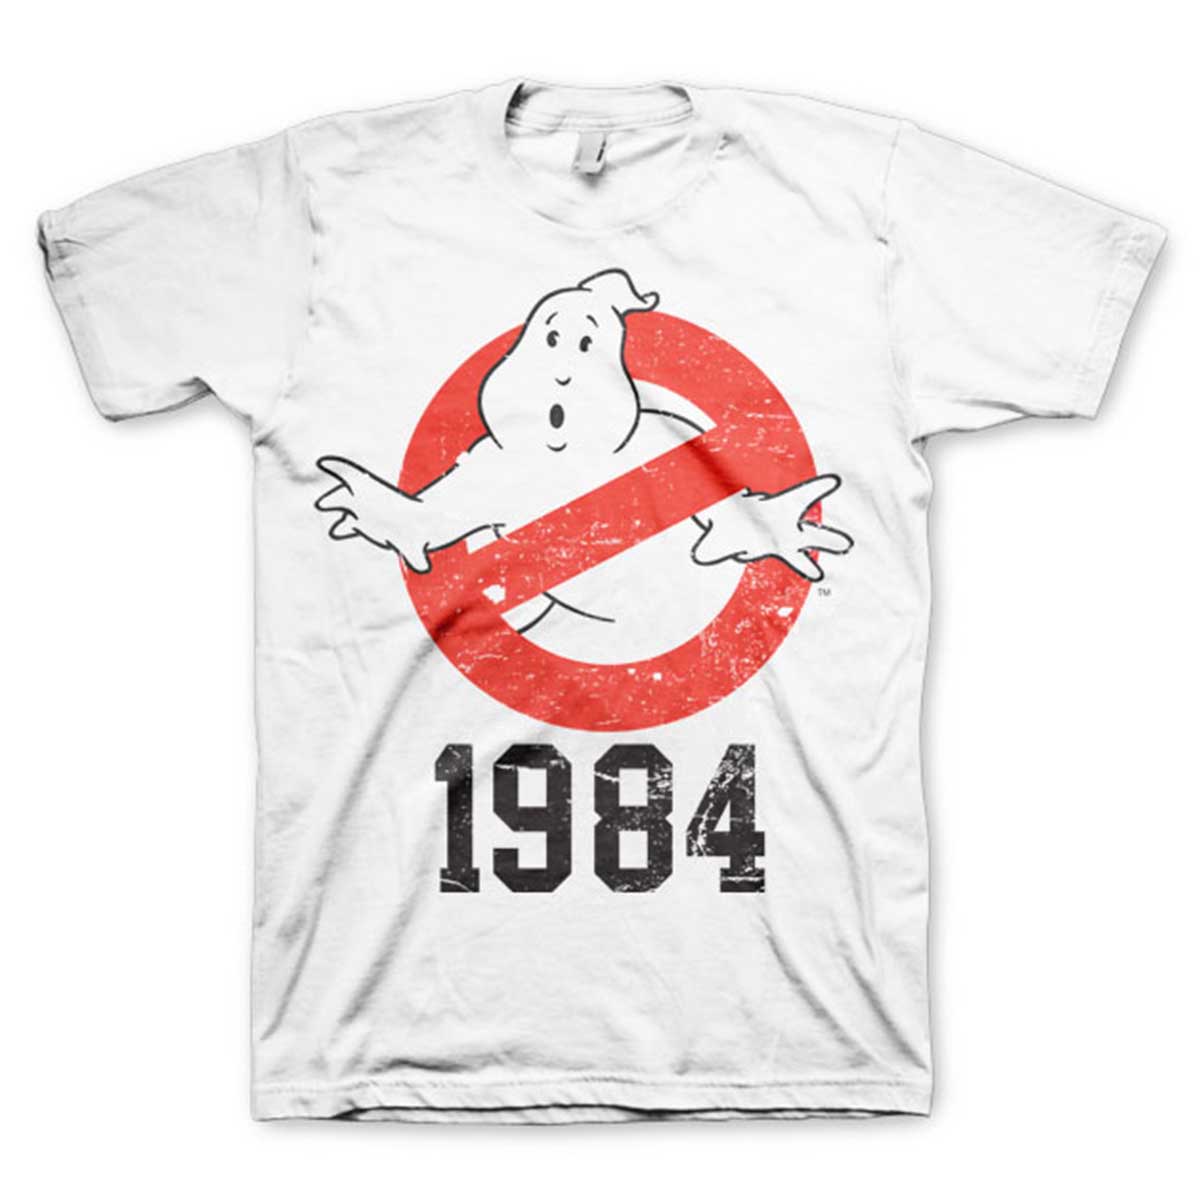 T-shirt Ghostbusters 1984 S